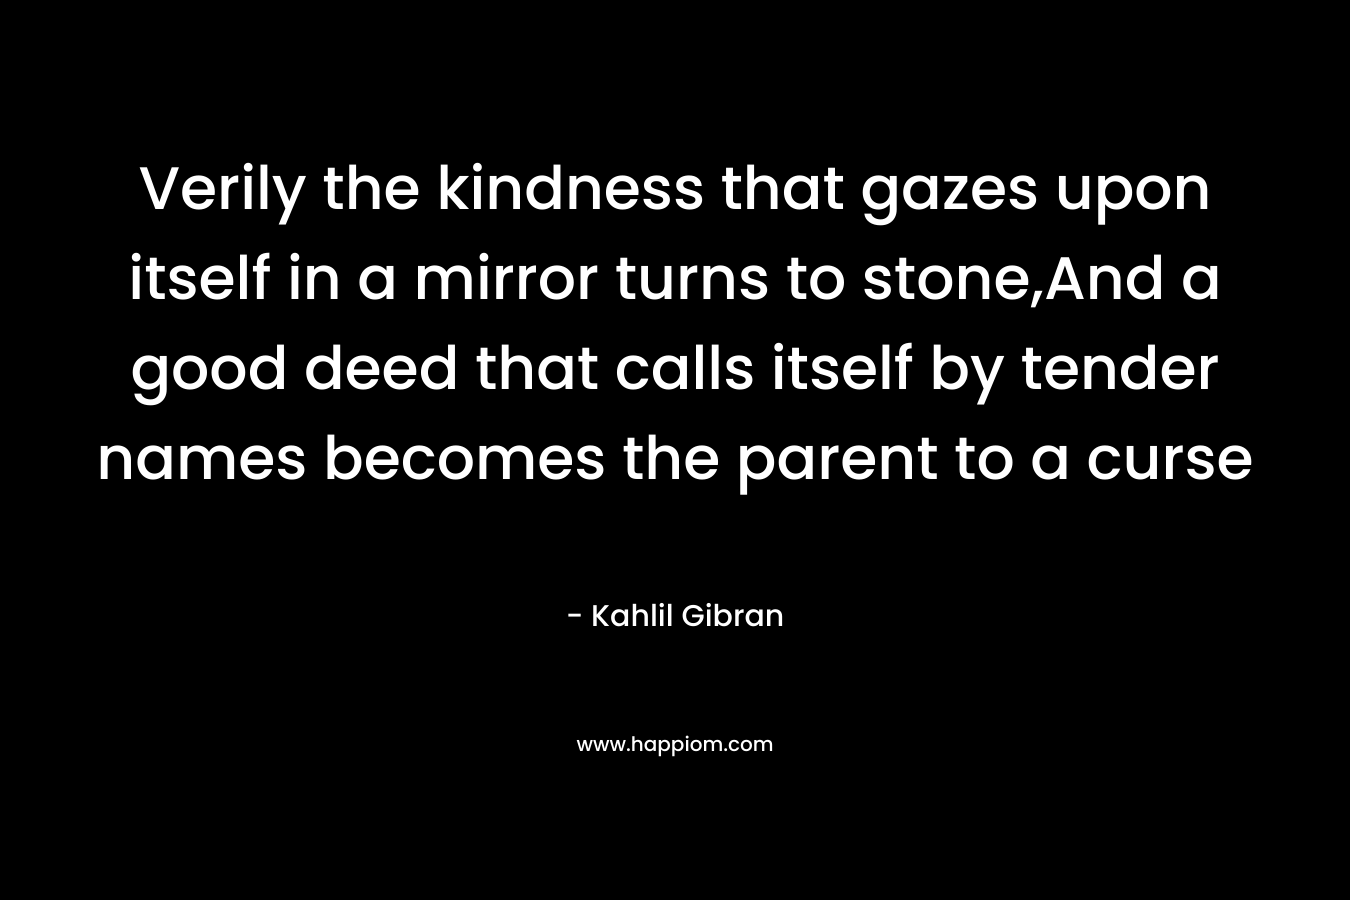 Verily the kindness that gazes upon itself in a mirror turns to stone,And a good deed that calls itself by tender names becomes the parent to a curse